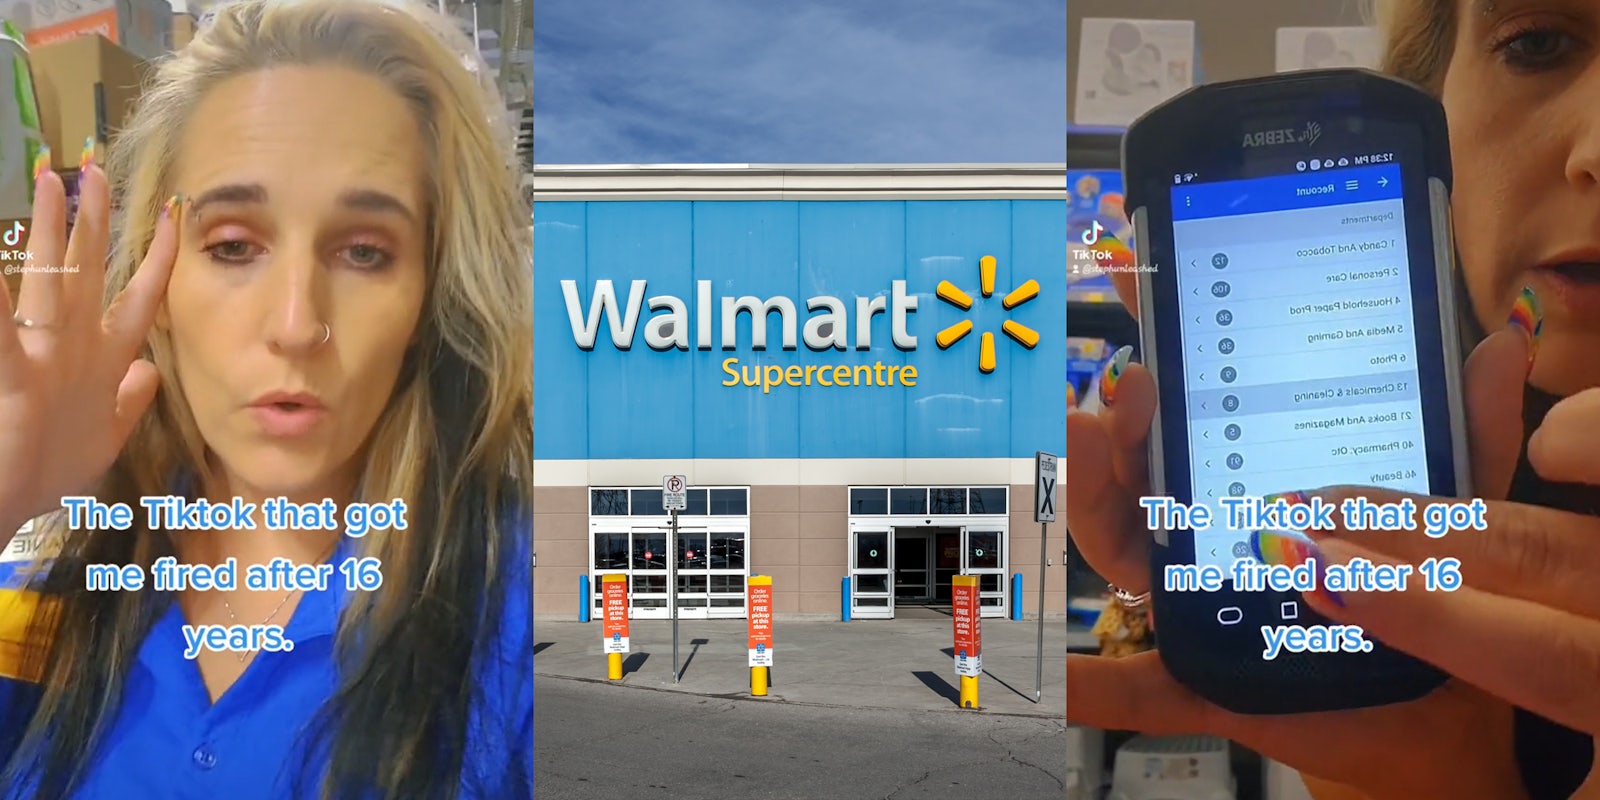 Walmart employee speaking with hand up and caption 'The TikTok that got me fired after 16 years.' (l) Walmart sign on building with parking lot (c) Walmart employee speaking with hand on Zebra scanner and caption 'The TikTok that got me fired after 16 years.' (r)